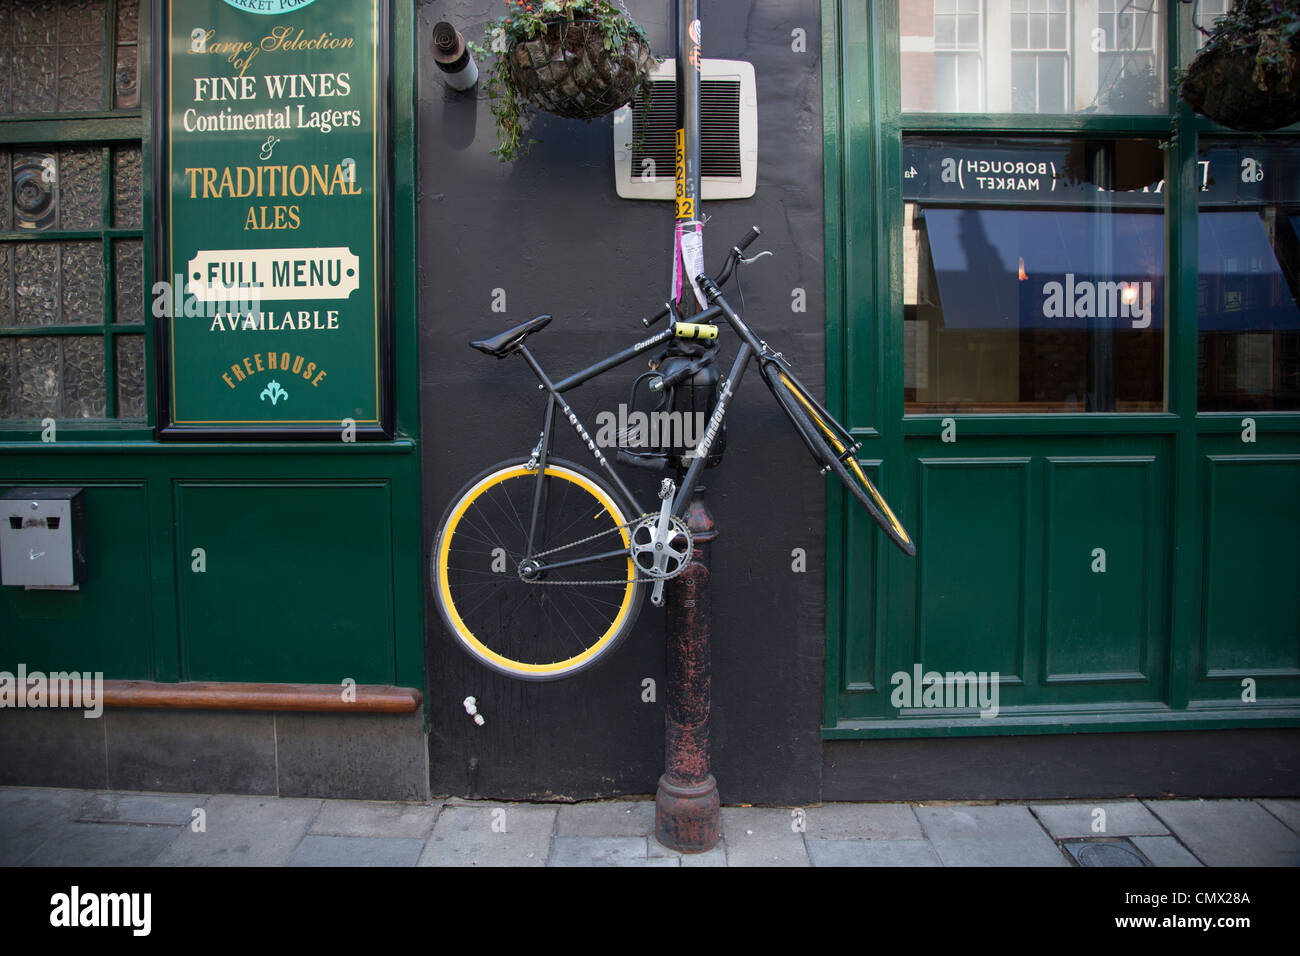 bike-chained-up-a-lamppost-outside-a-pub